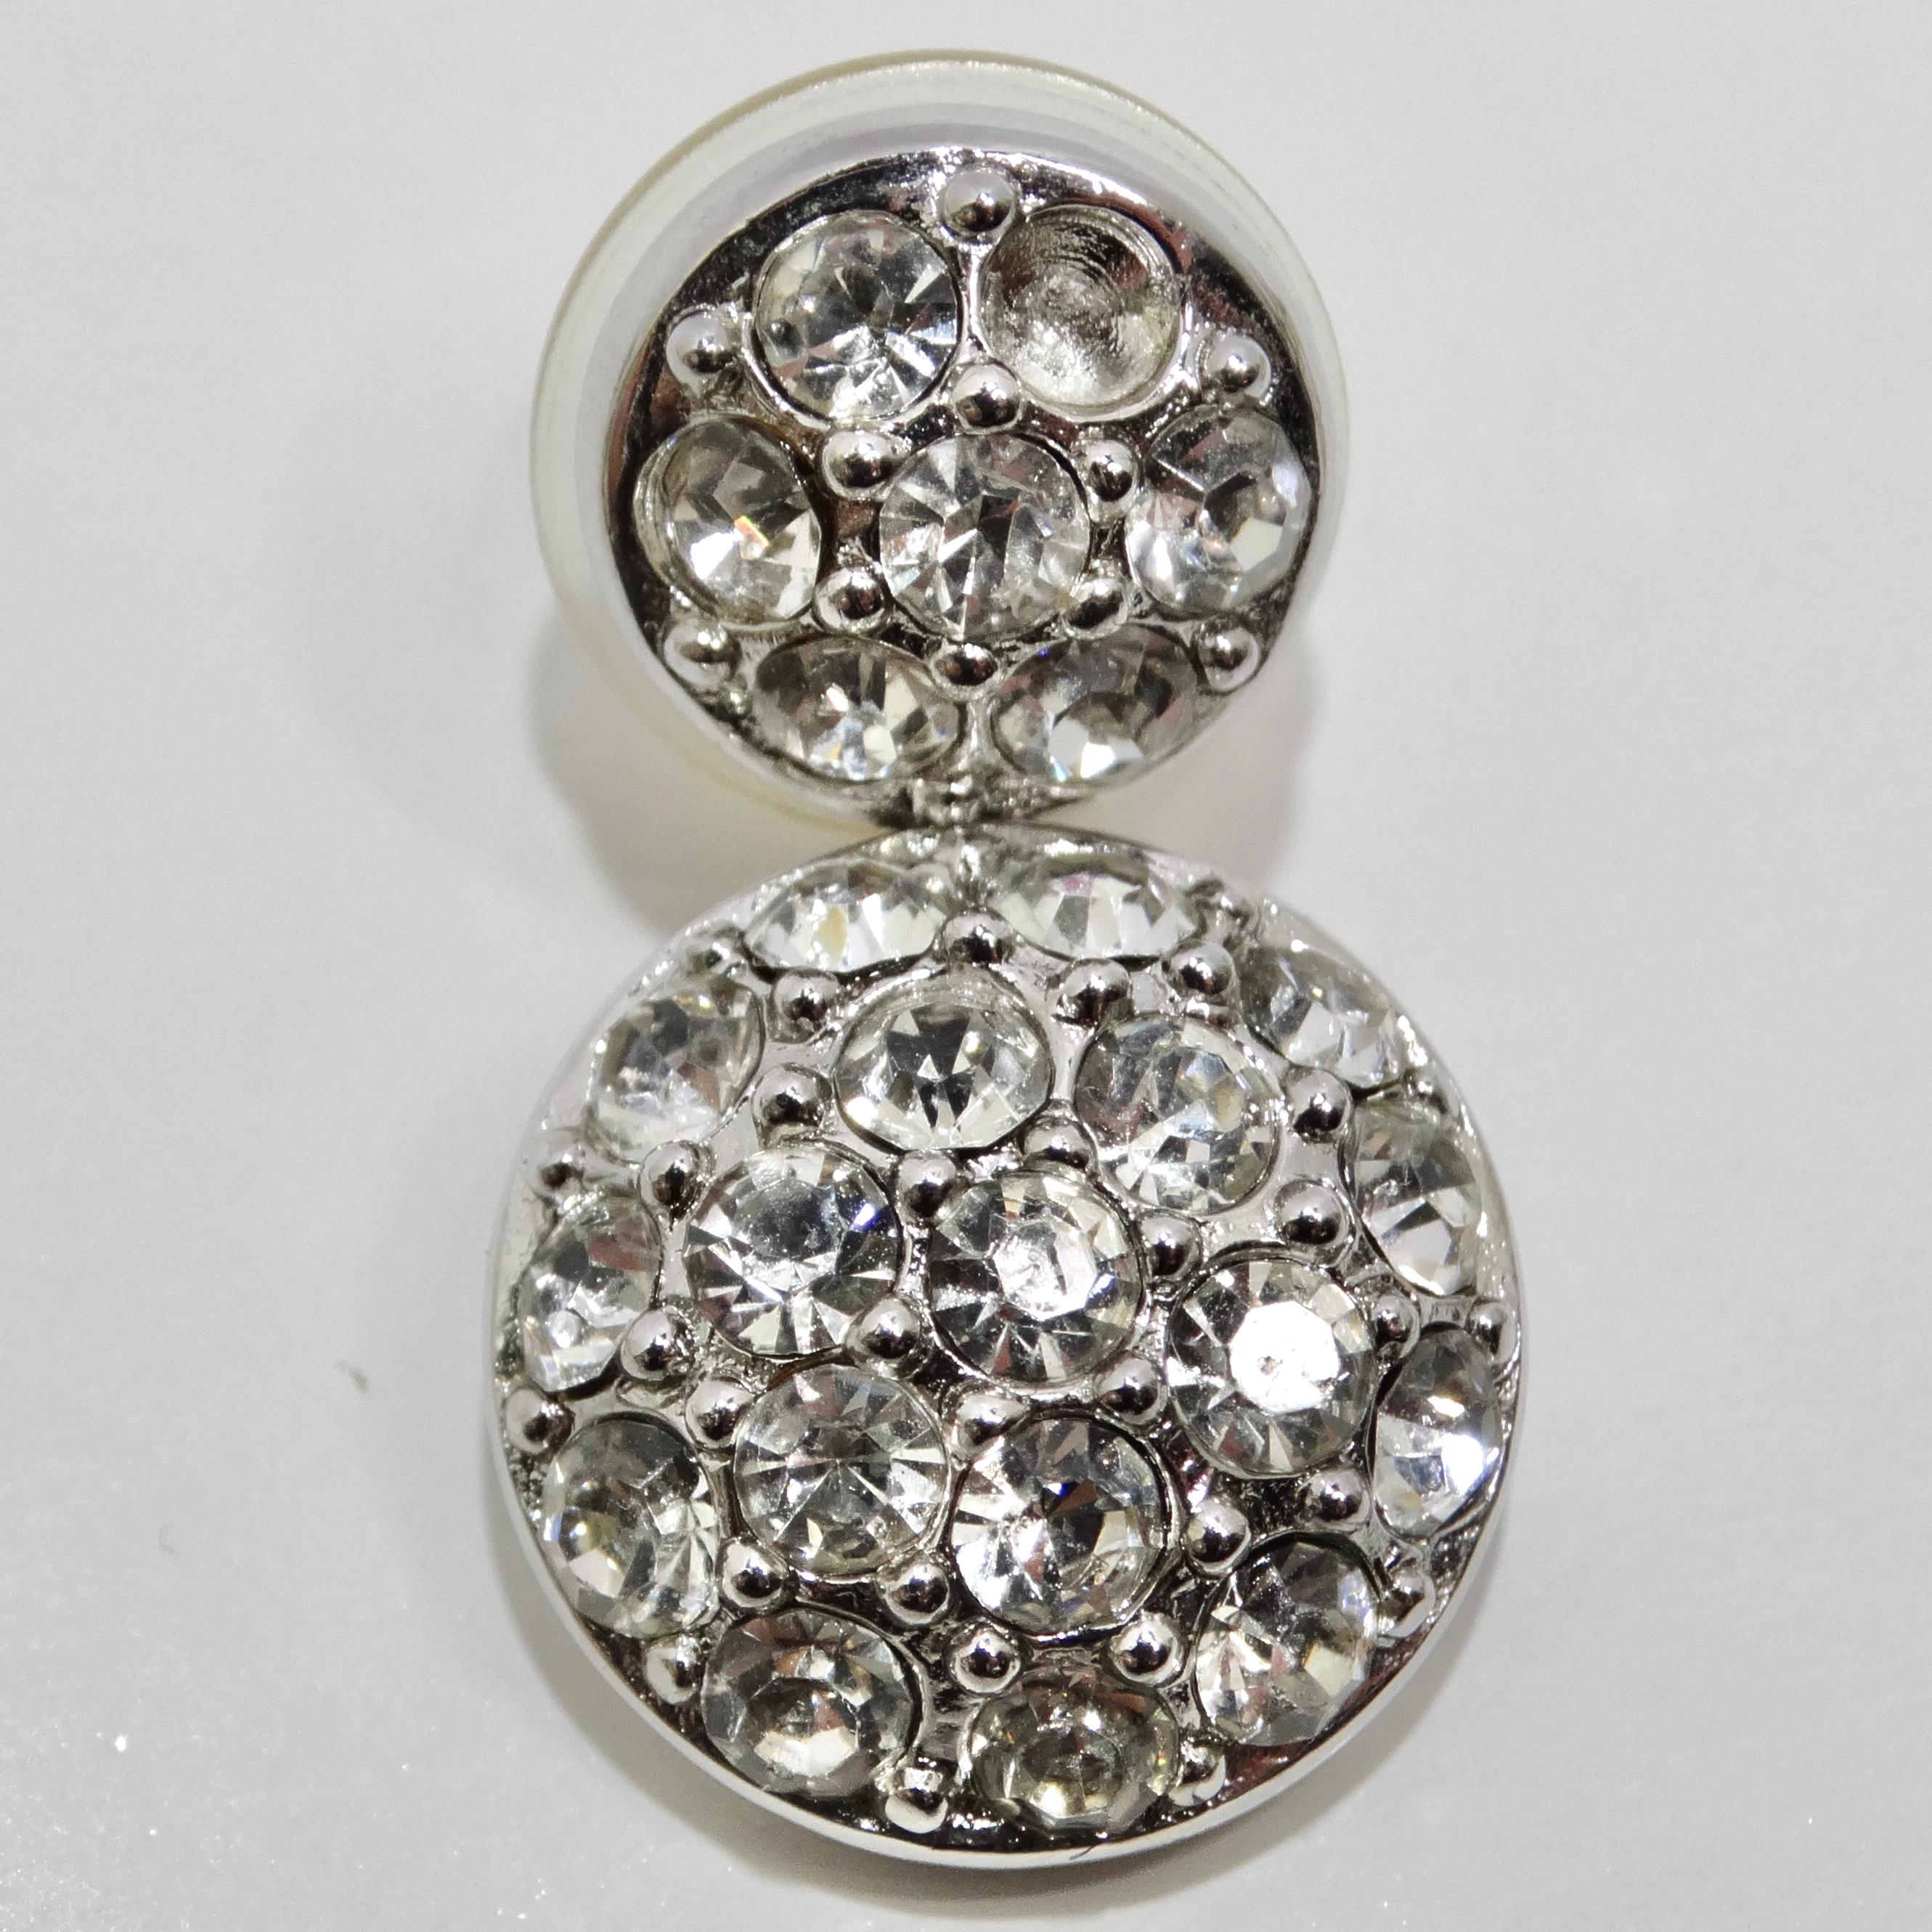 Christian Dior 1980s Rhinestone Dangle Earrings In Good Condition For Sale In Scottsdale, AZ